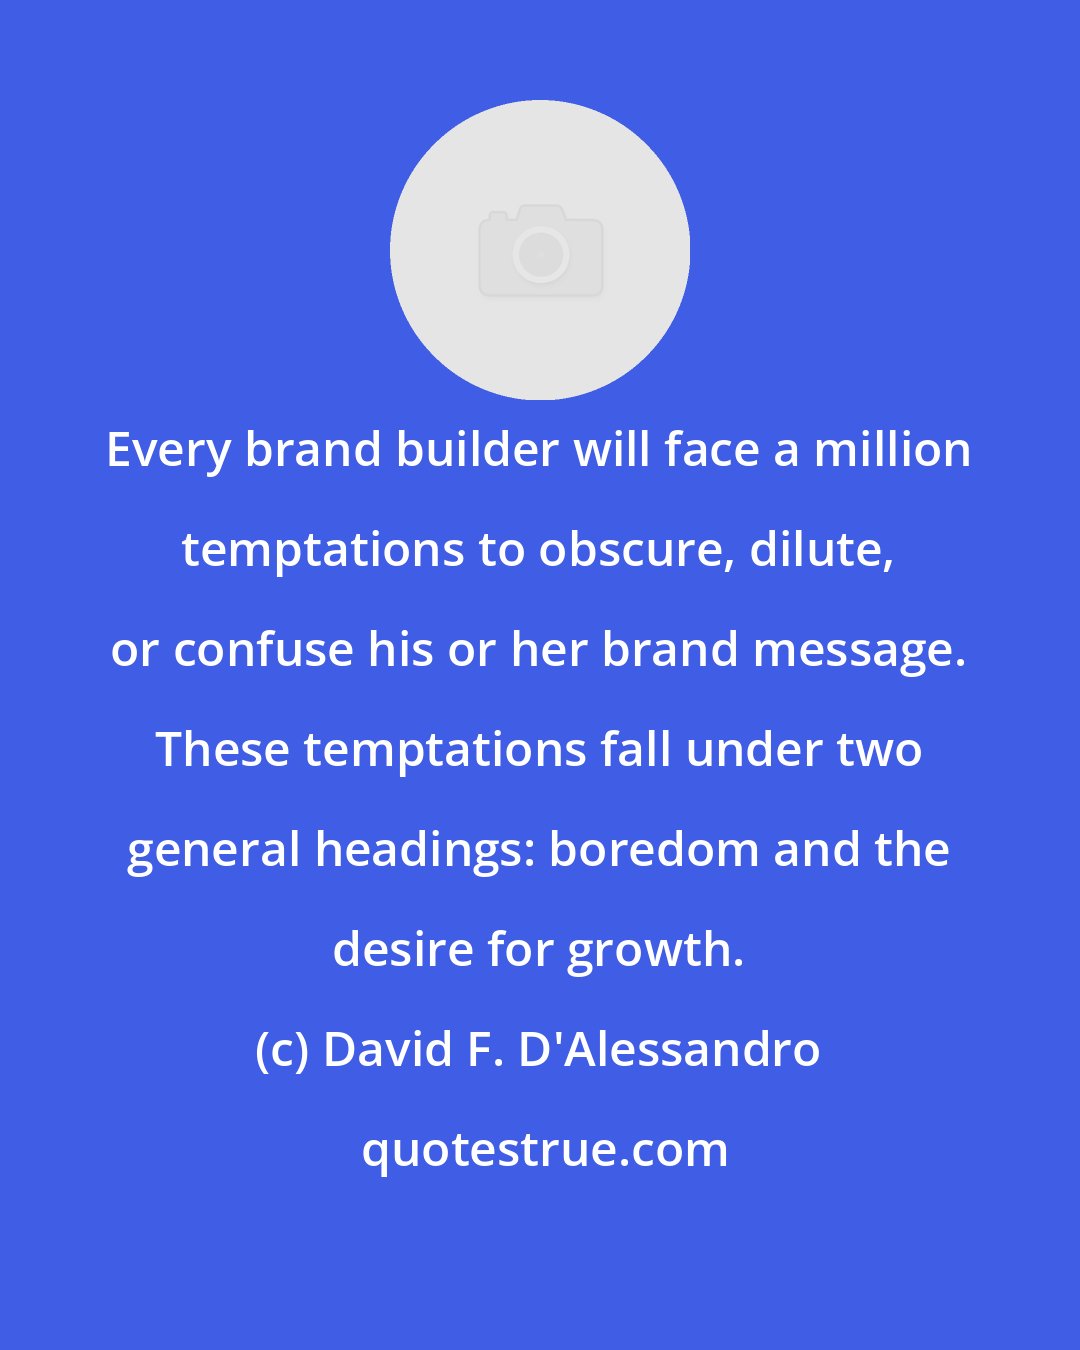 David F. D'Alessandro: Every brand builder will face a million temptations to obscure, dilute, or confuse his or her brand message. These temptations fall under two general headings: boredom and the desire for growth.